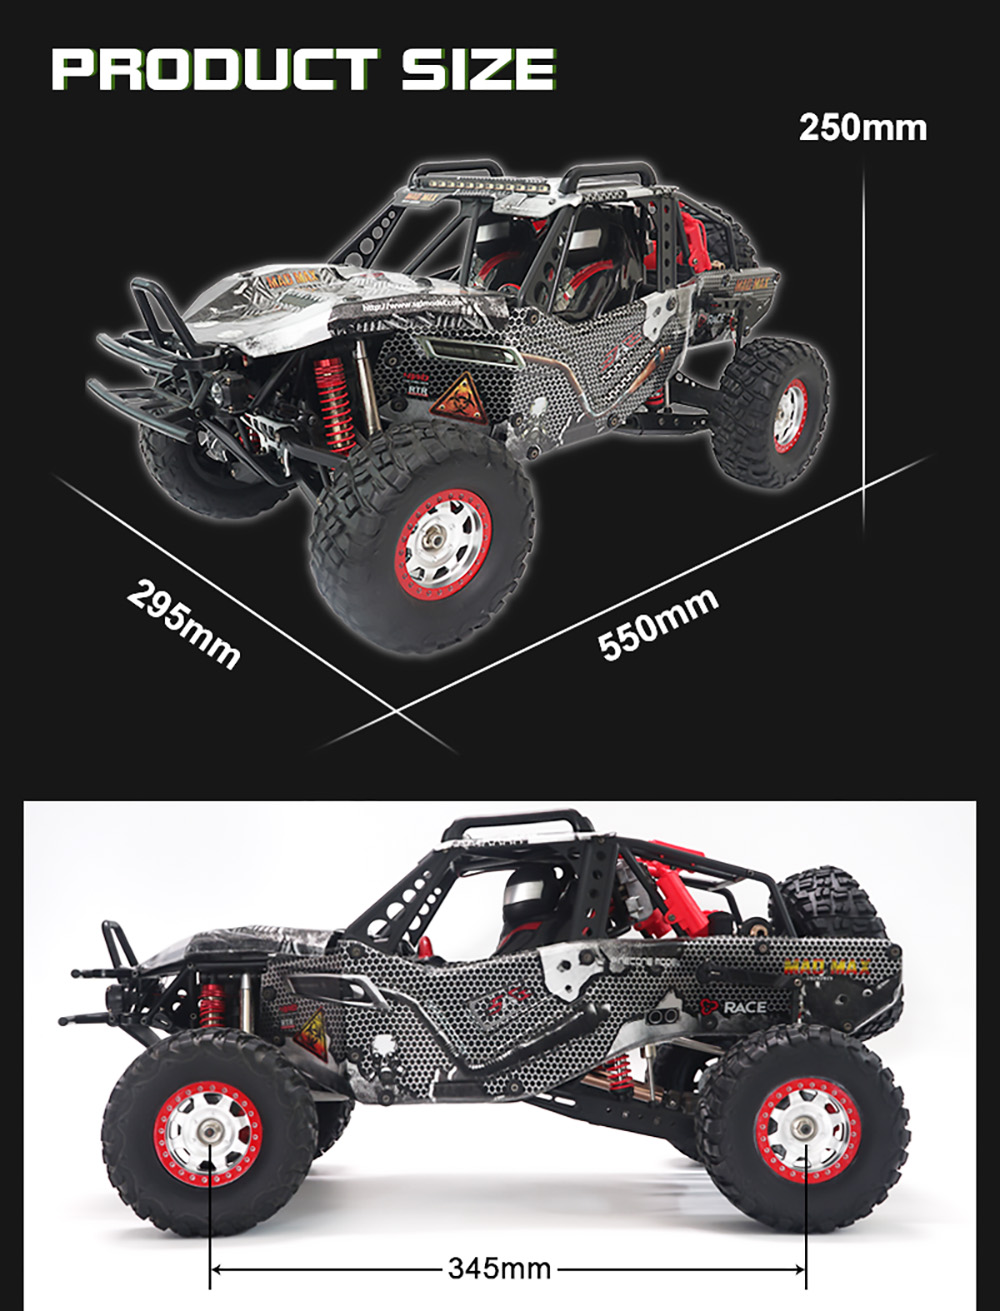 All-Terrain Desert Off-Road High Speed RC Vehicle with 3660-2200kV Non-Inductive Brushless Waterproof Motor - Metal Gray